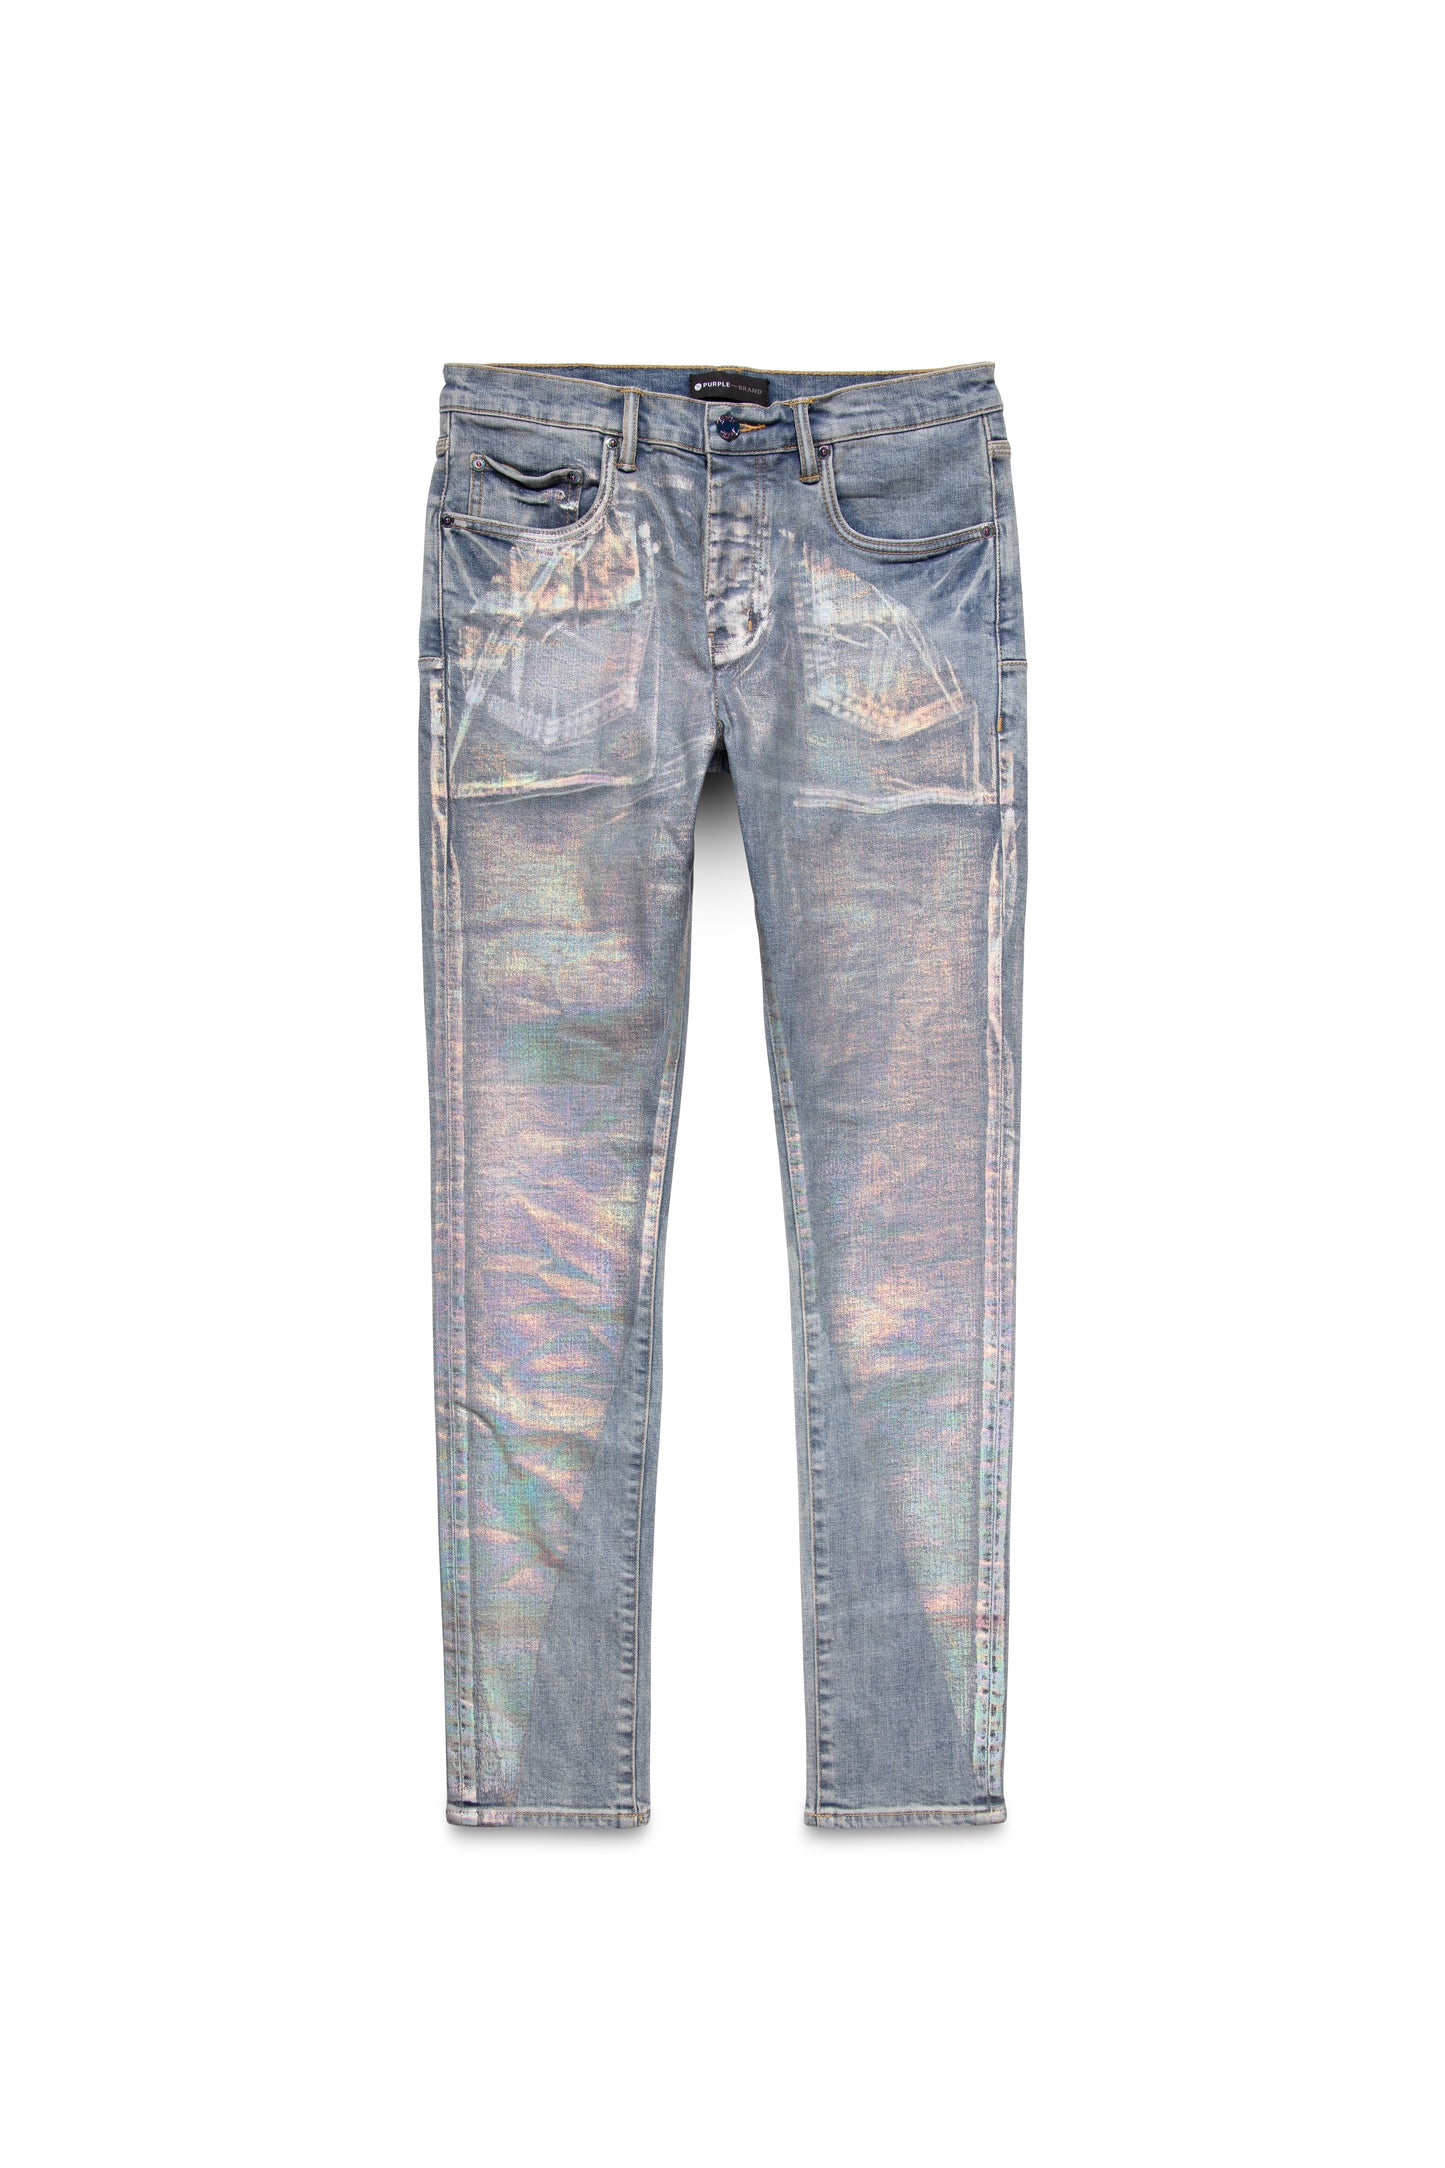 P001 LOW RISE SKINNY JEAN - Holographic Fragment Over 3 Year Light Indigo